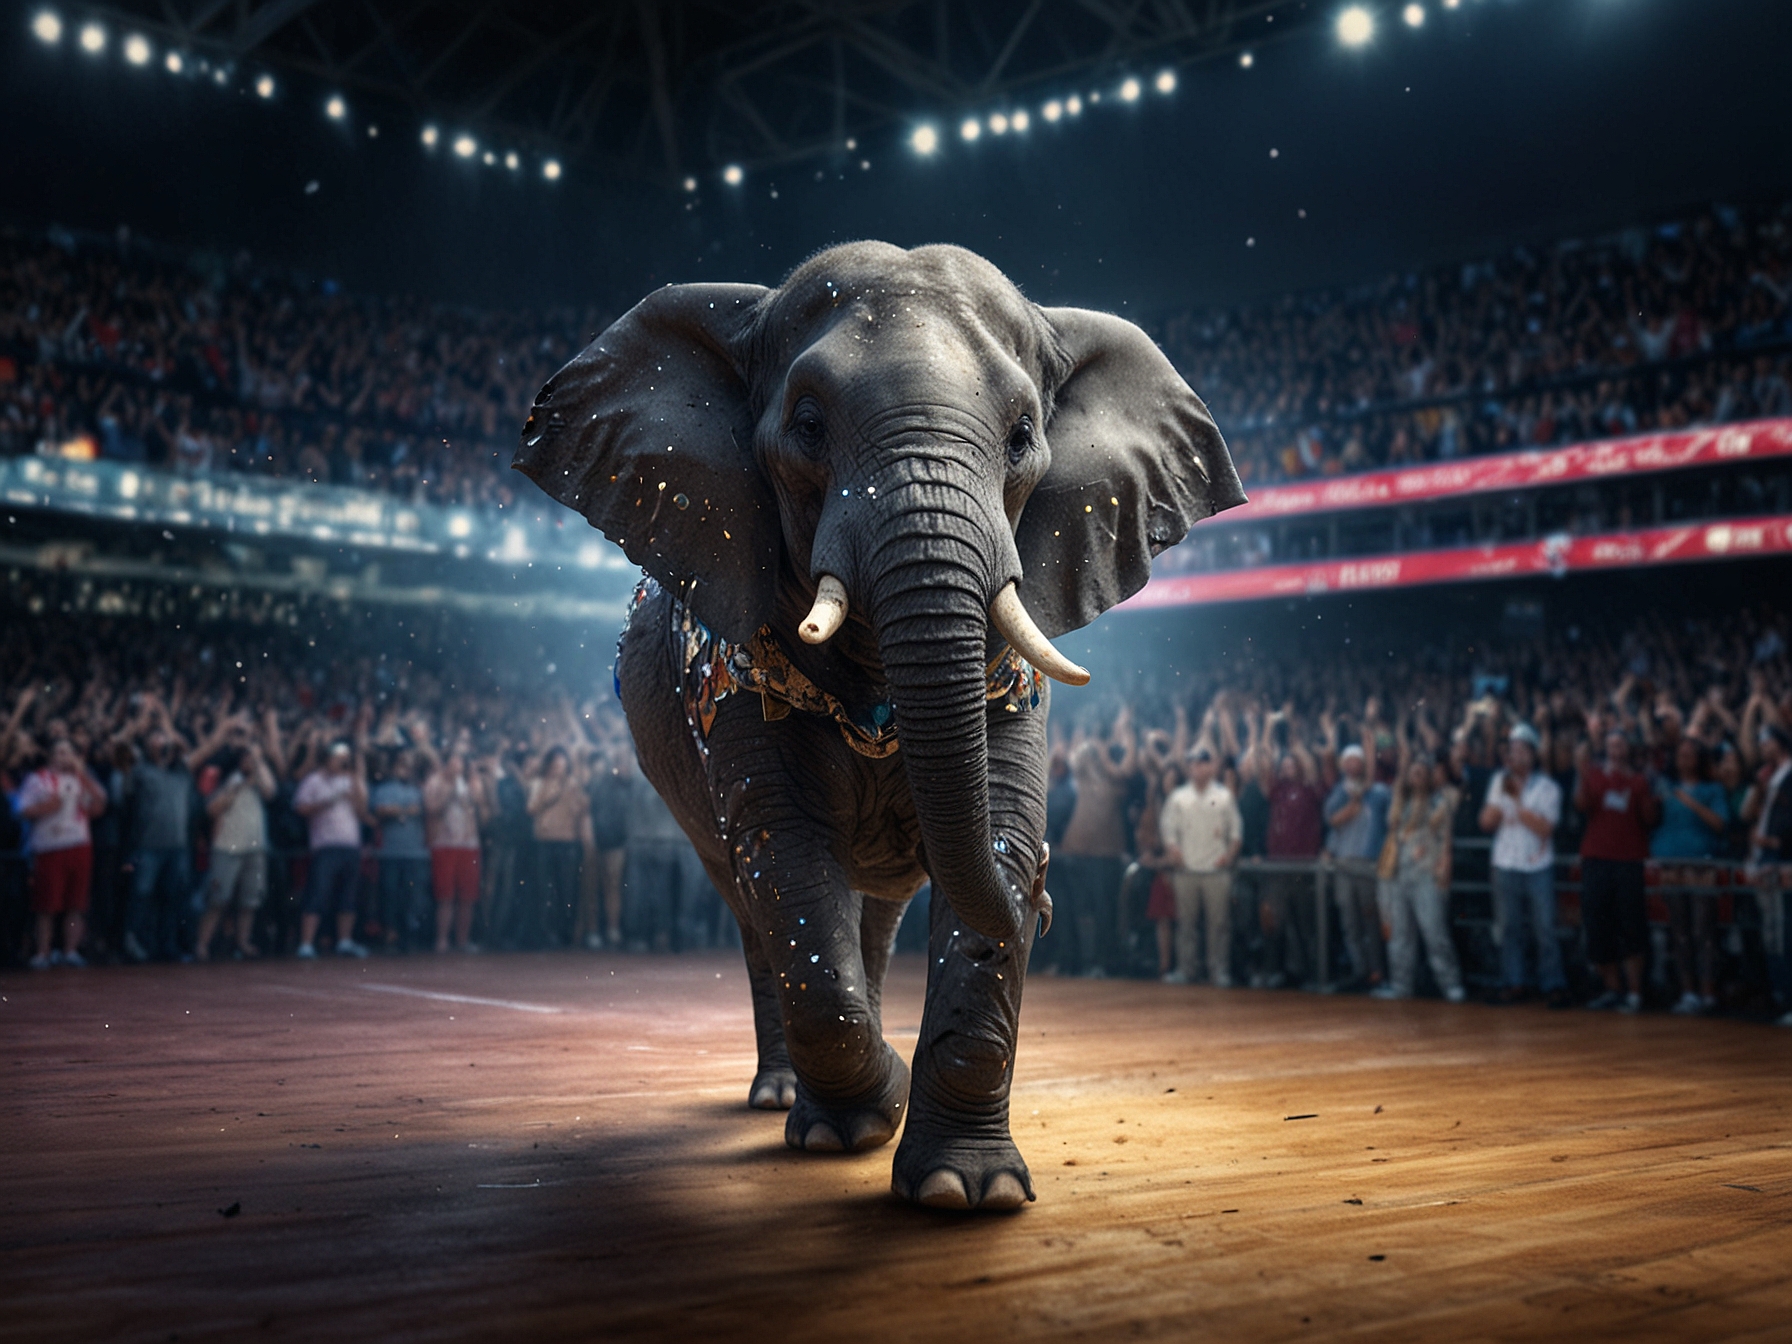 Ellie the Elephant, dressed in a sparkling outfit similar to Beyoncé's style, performing a choreographed dance routine at a NY Liberty game as a tribute to the 'Renaissance' album.